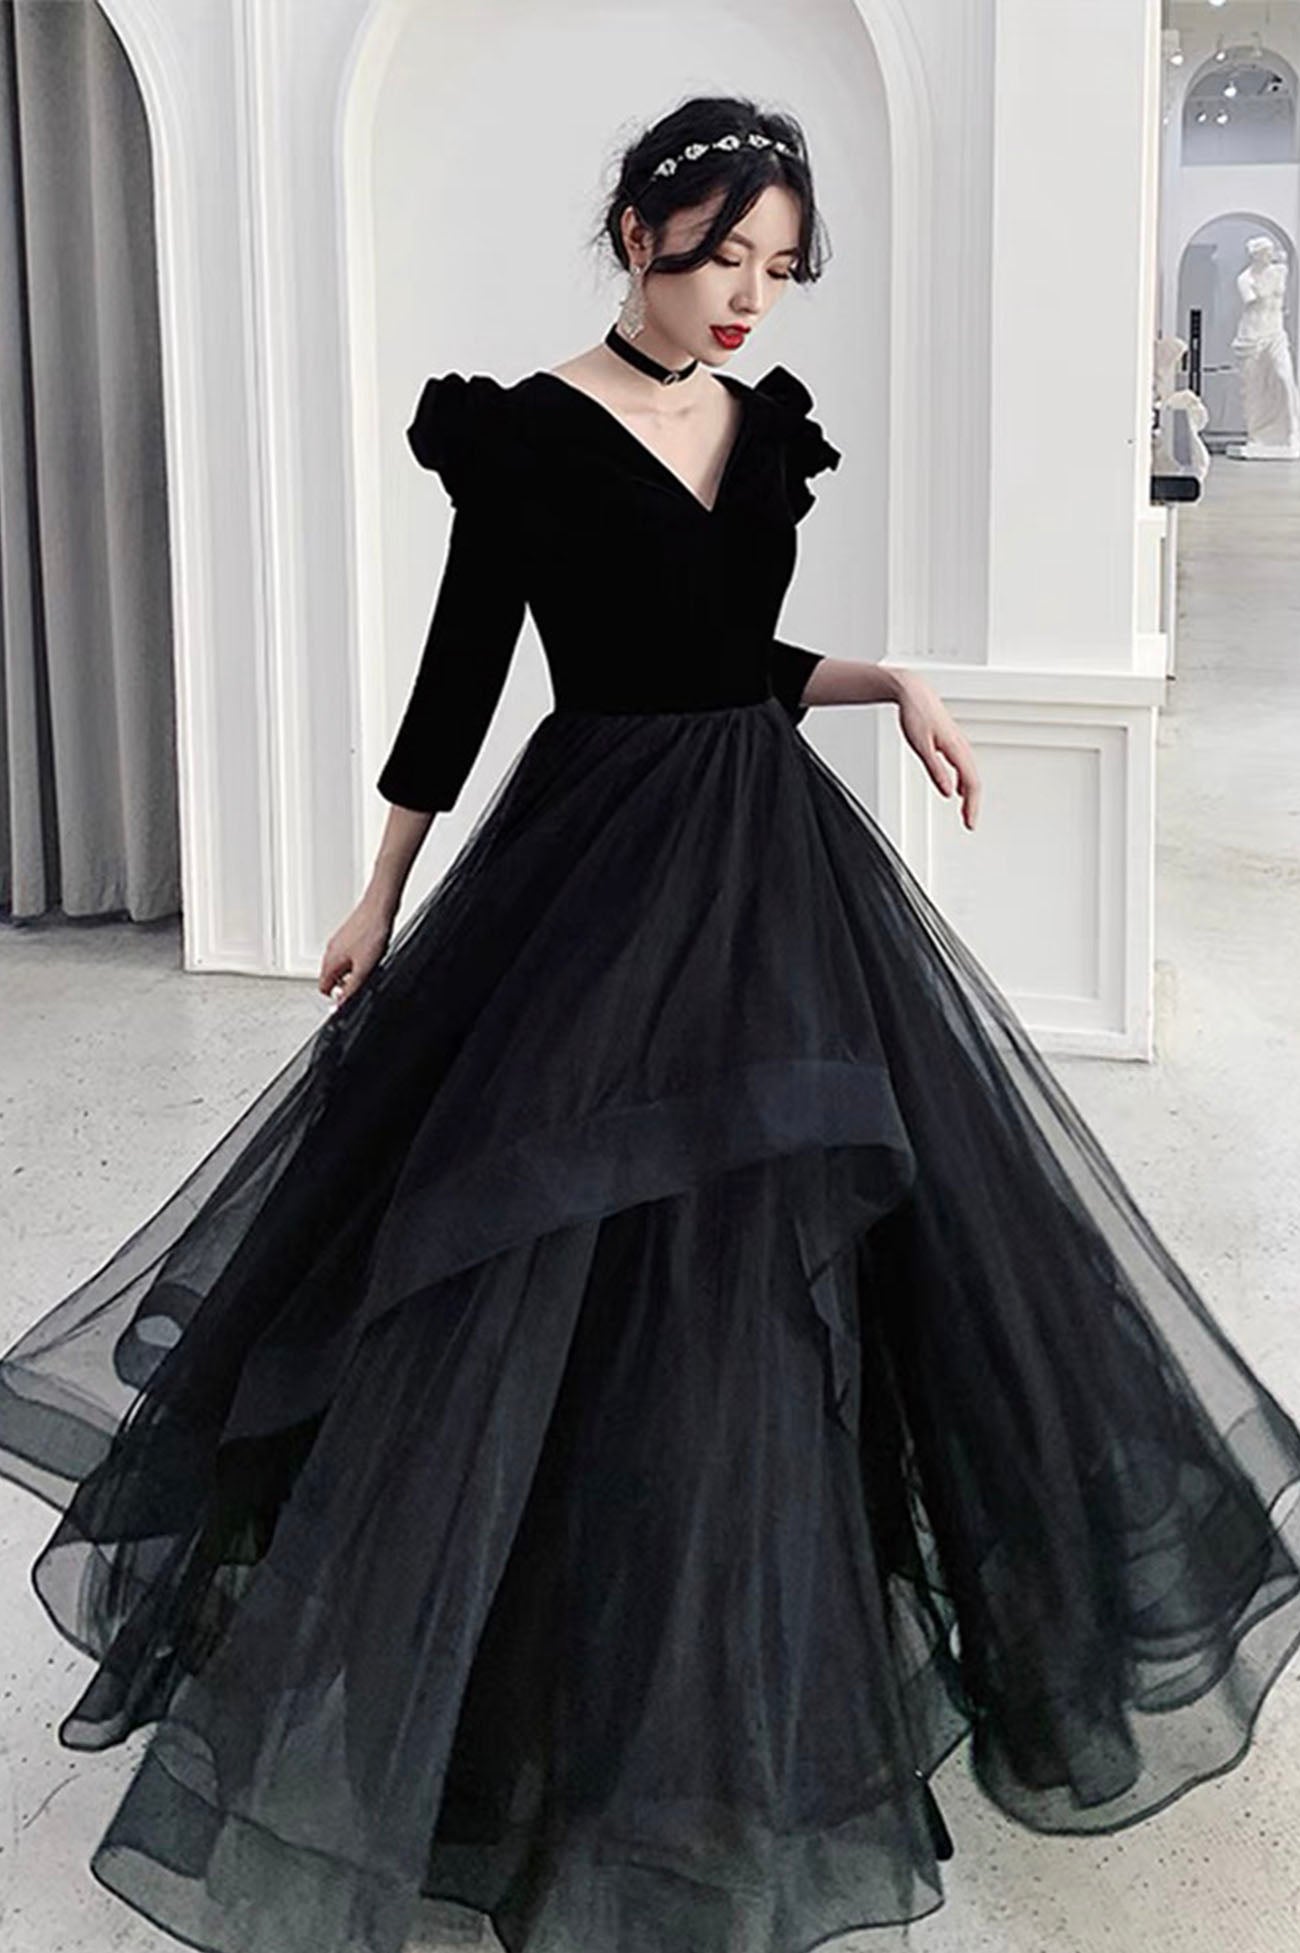 Strapless Sweetheart Black Satin Tulle Court Ball Gown Wedding Dress -  Princessly